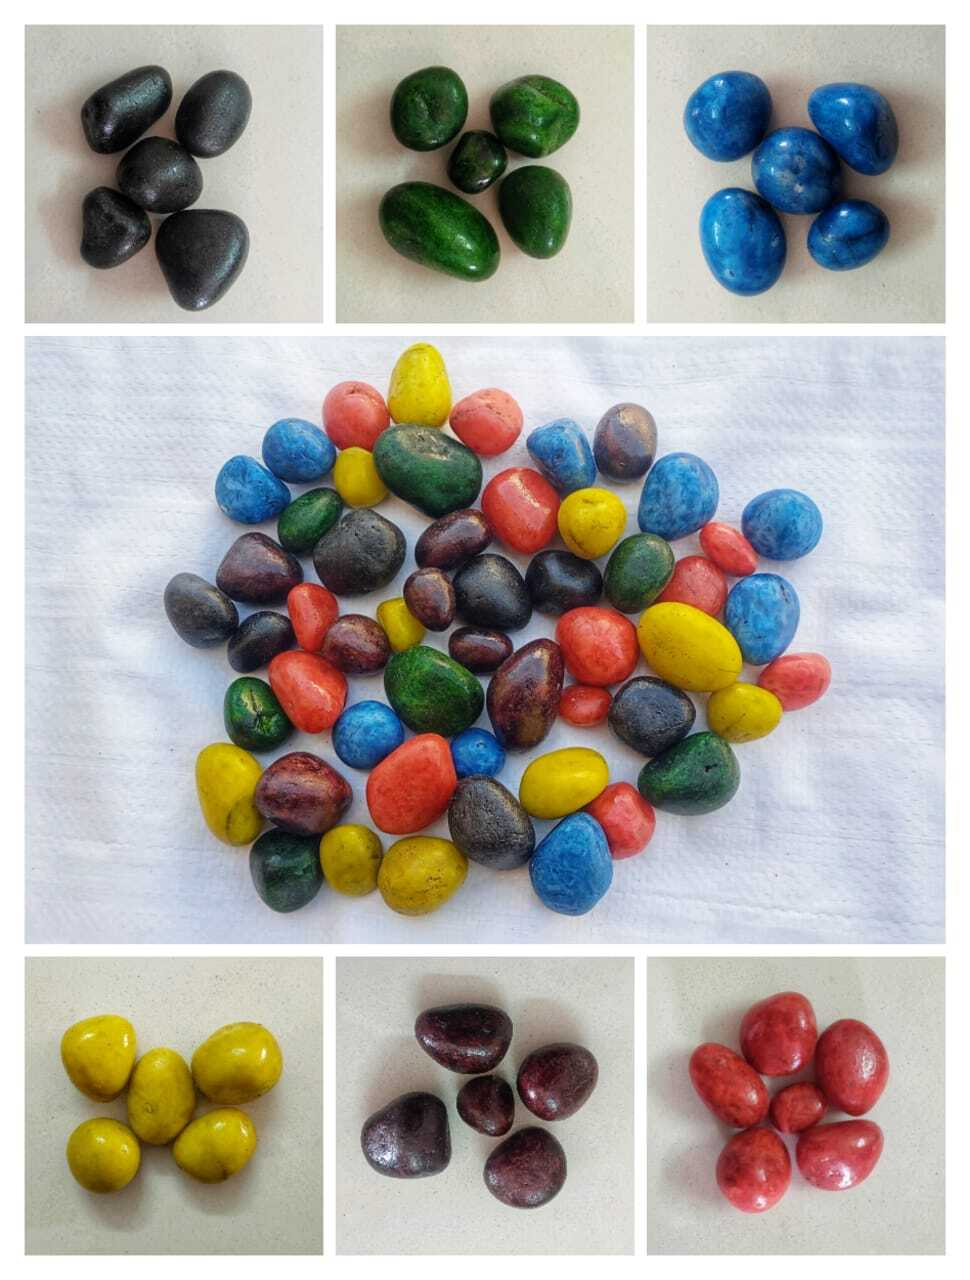 Small and medium size round polished blue color coated pebbles stone and gravels price per tone